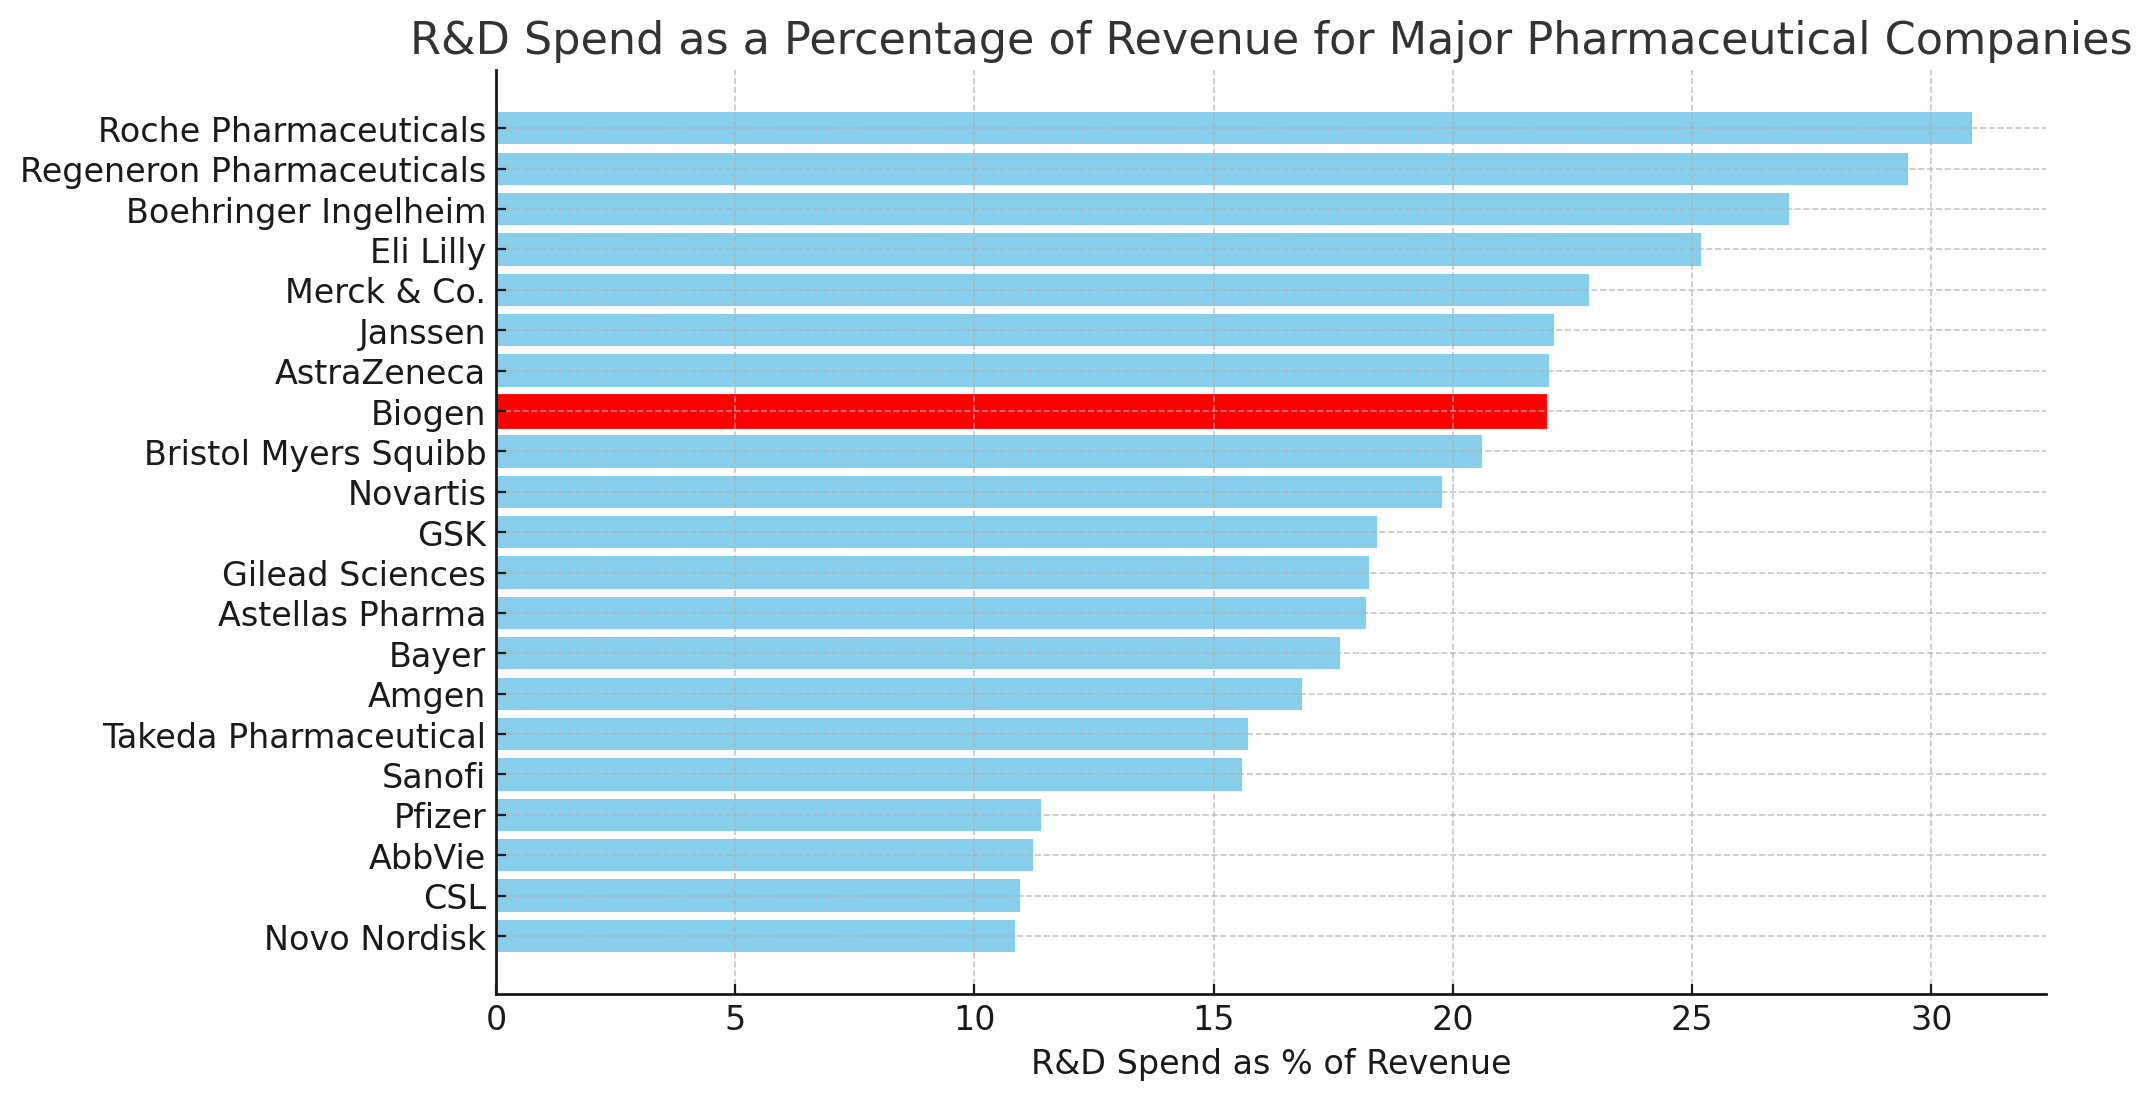 Biogen's R&D spending was moderate as a percentage compared to some of its peers